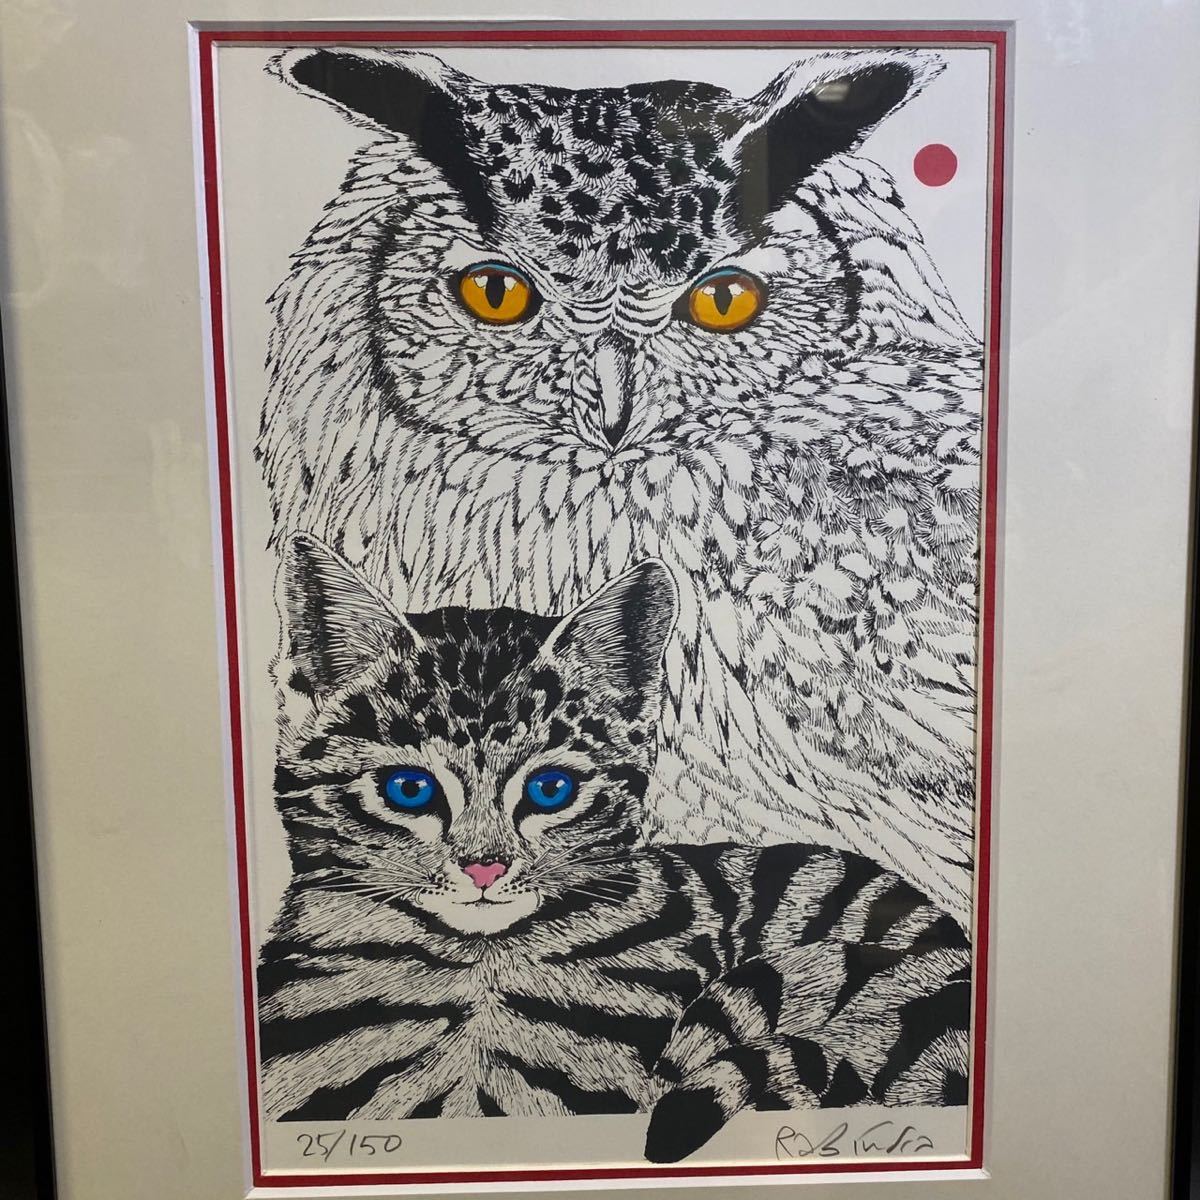 [ genuine work ]la bin gong * Dunk sRabindra Danks *[ owl . cat ]* lithograph with autograph / picture / work of art / cat 